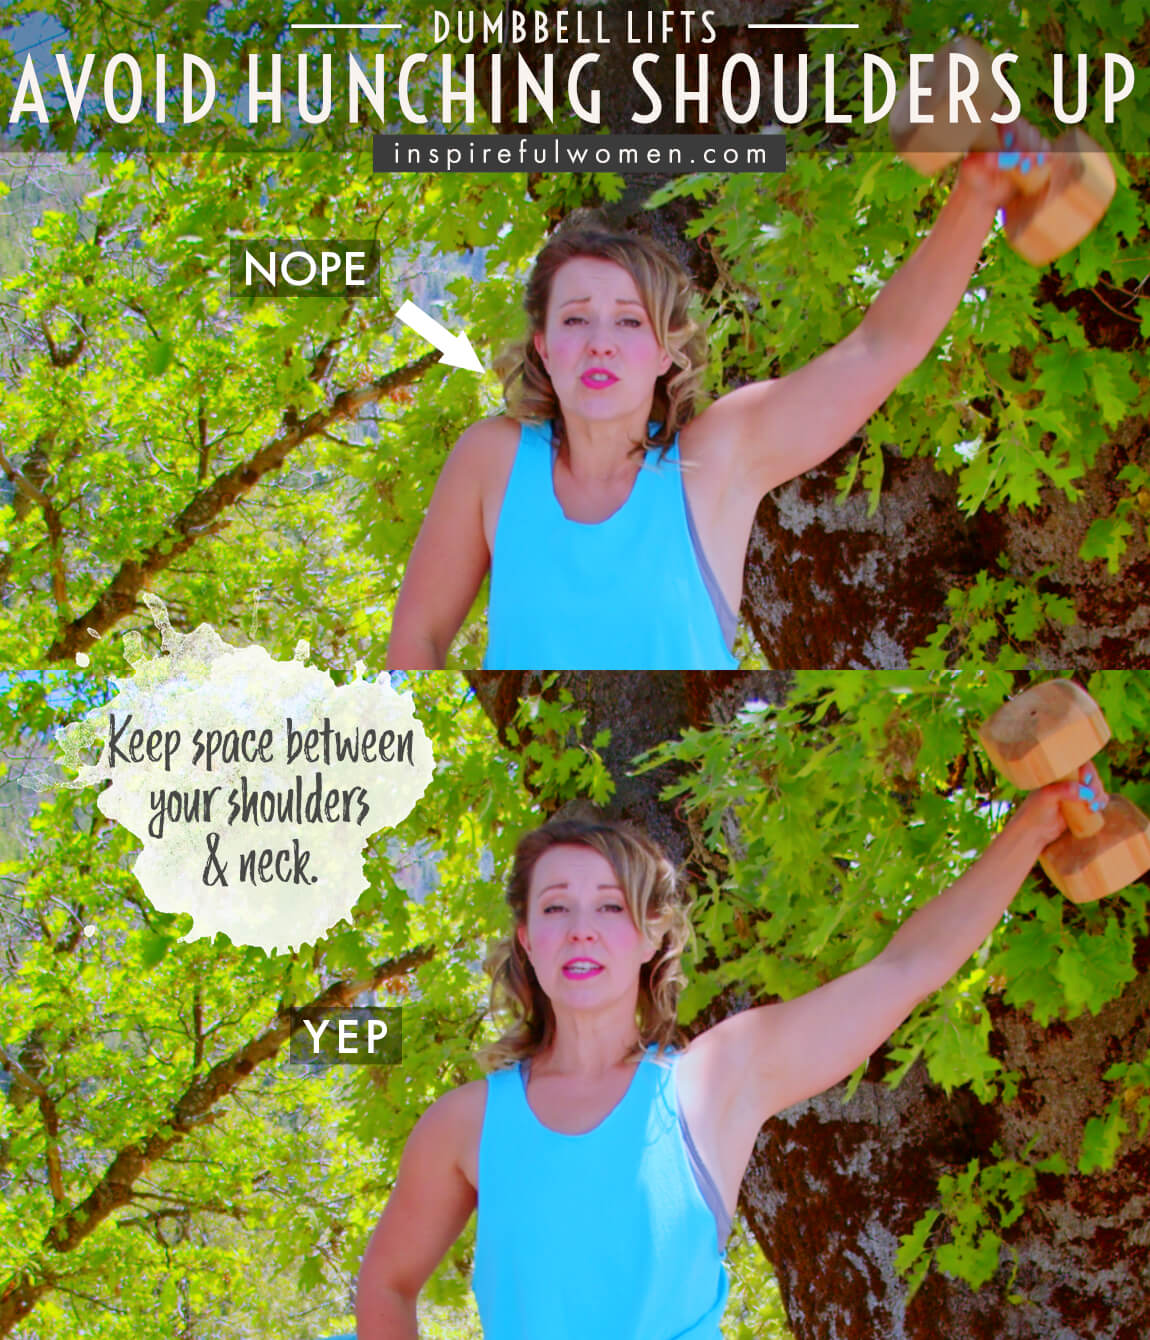 avoid-hunching-shoulders-up-dumbbell-lifts-standing-core-exercise-common-mistakes